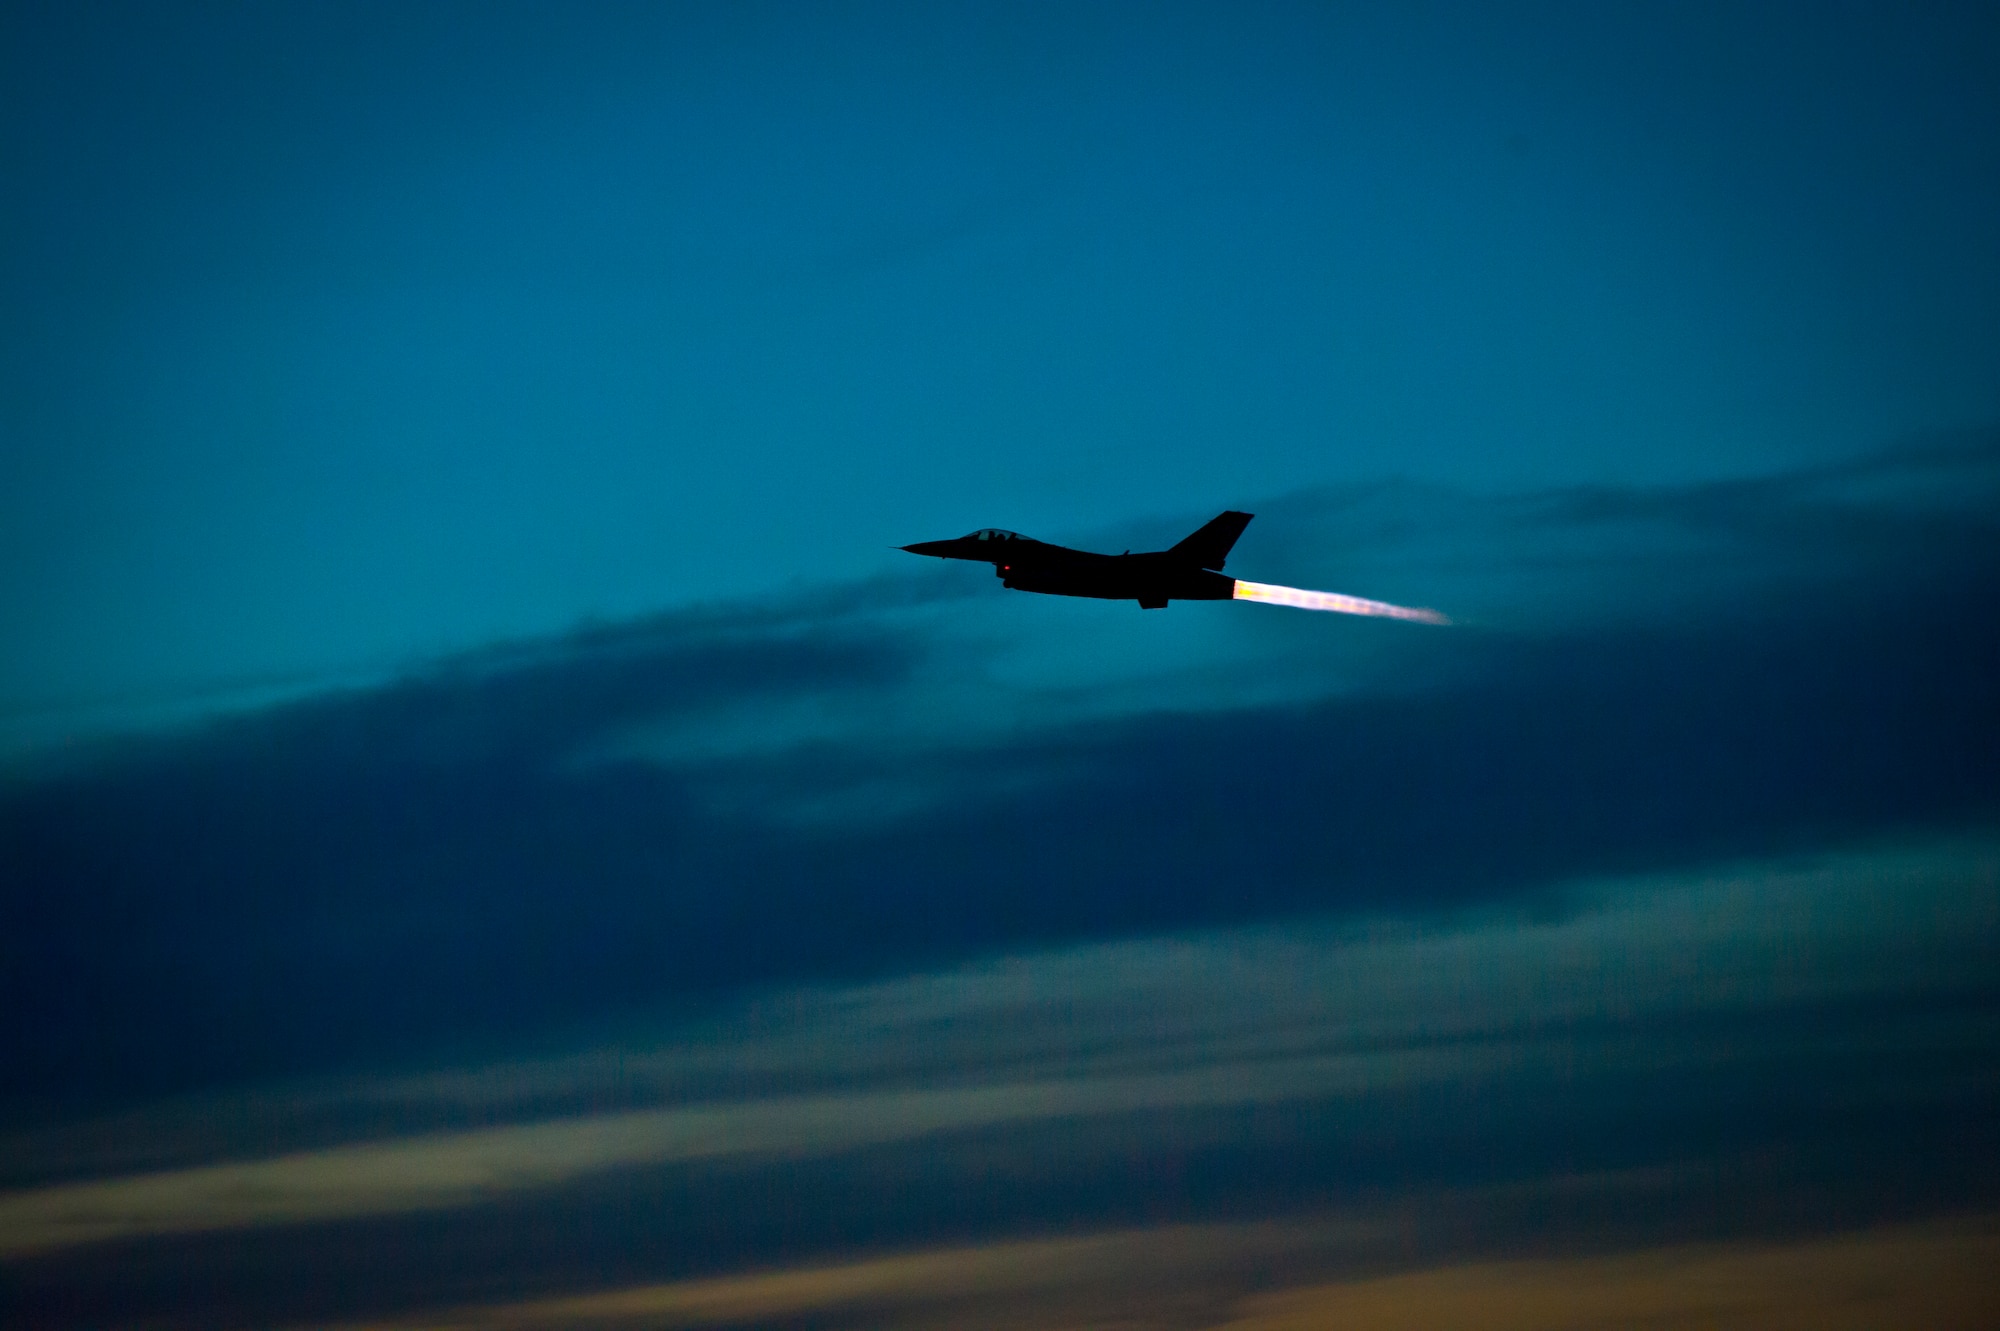 An F-16 Fighting Falcon takes off at Holloman Air Force Base, N.M. May 13, 2015. The 311th Fighter Squadron, a tenant unit from Luke Air Force Base, Ariz., trains F-16 pilots at Holloman. The students are currently at a point in their syllabus where they are learning how to use night vision goggles and perform combat night operations.  (U.S. Air Force photo by Airman 1st Class Emily A. Kenney/Released)
